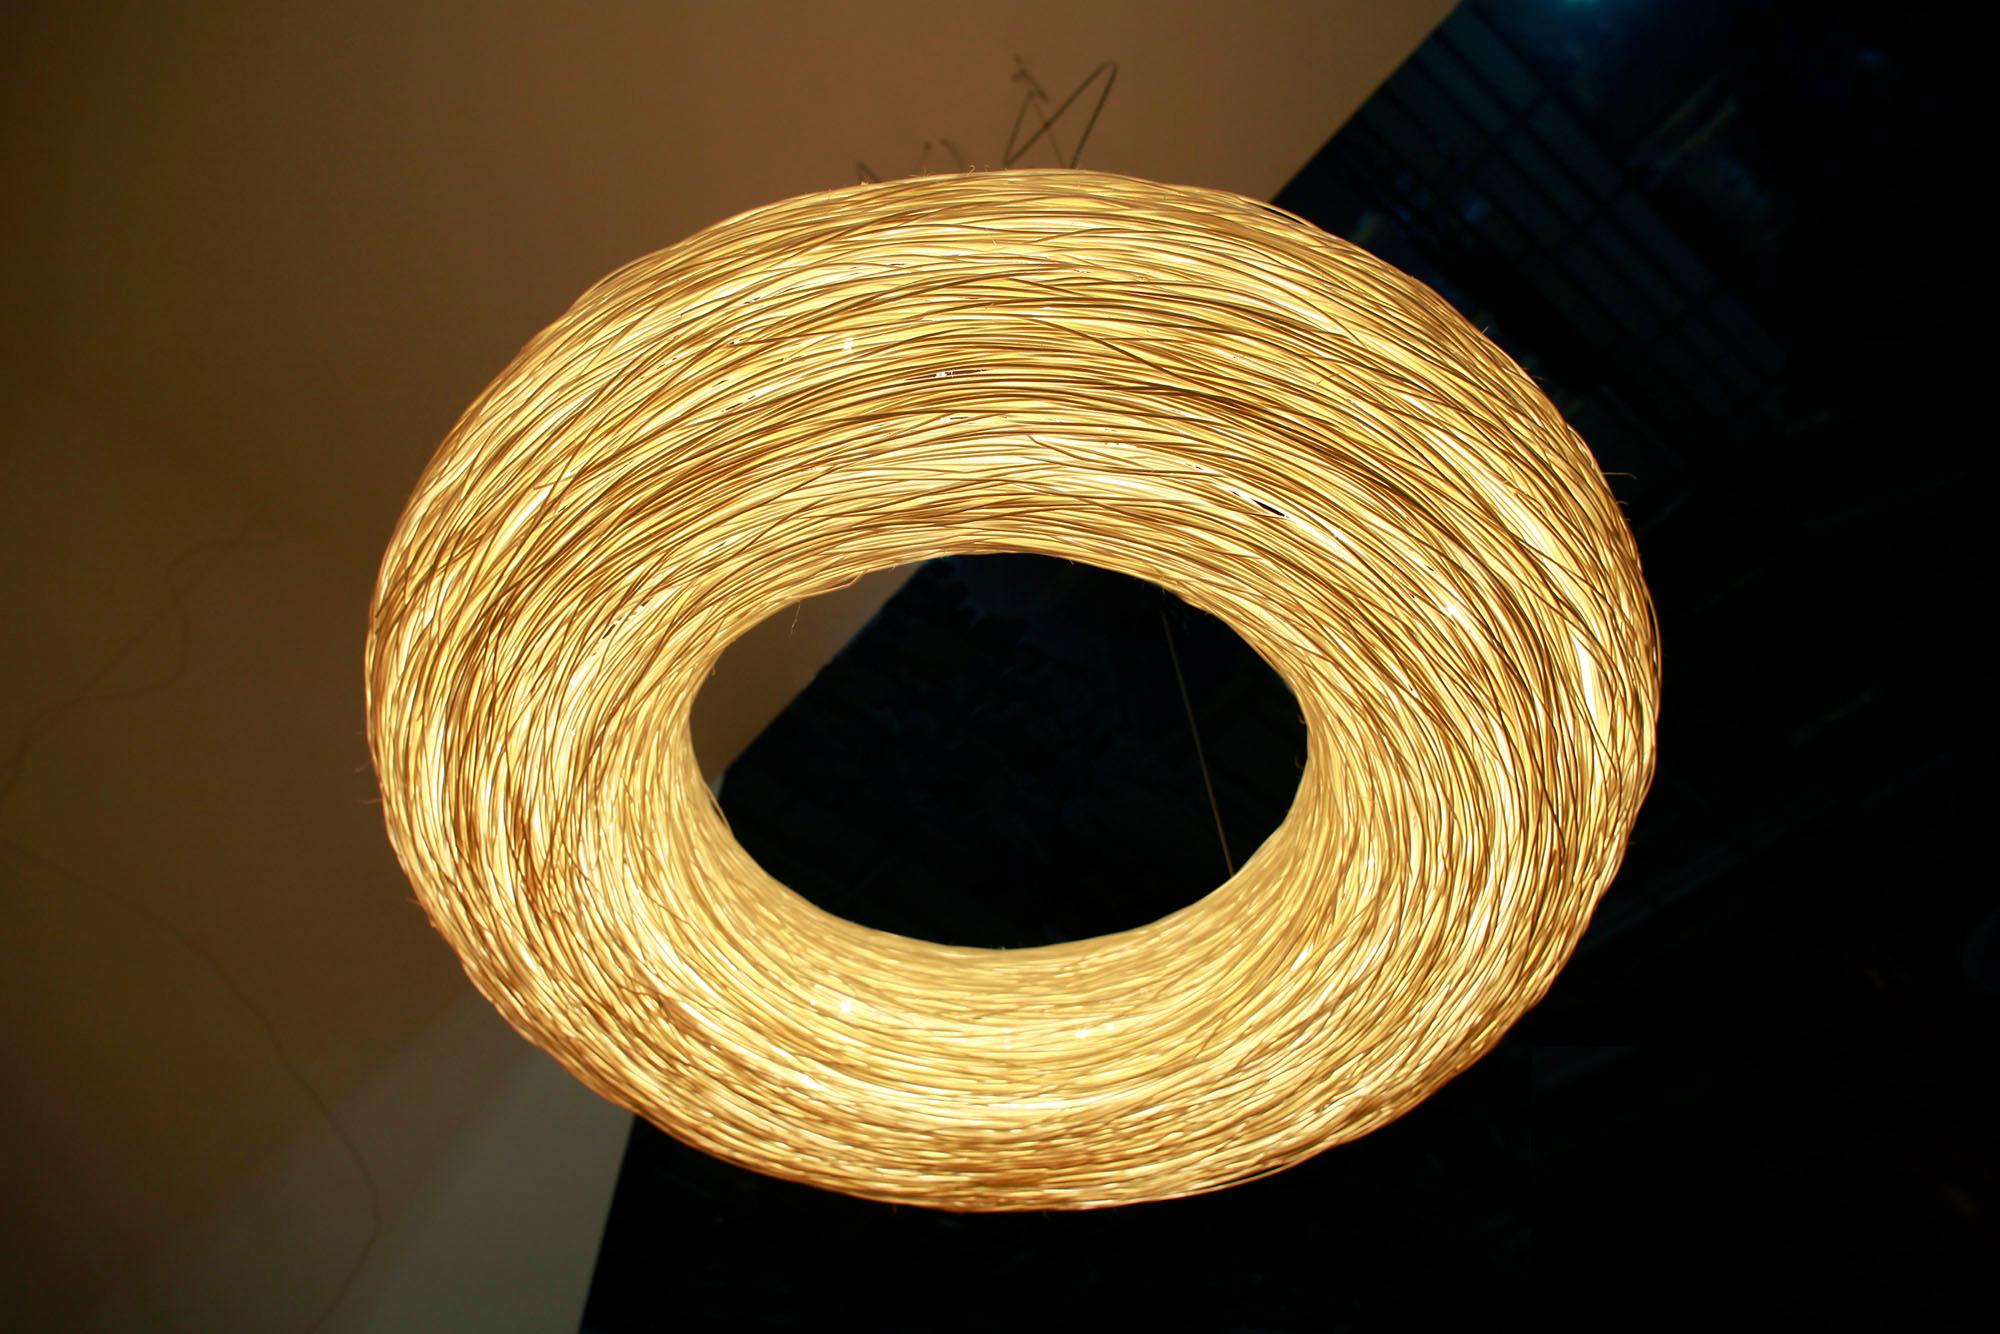 Organic Modern Yellow Crown by Ango, Hand-woven pendant light in a timeless circular form For Sale